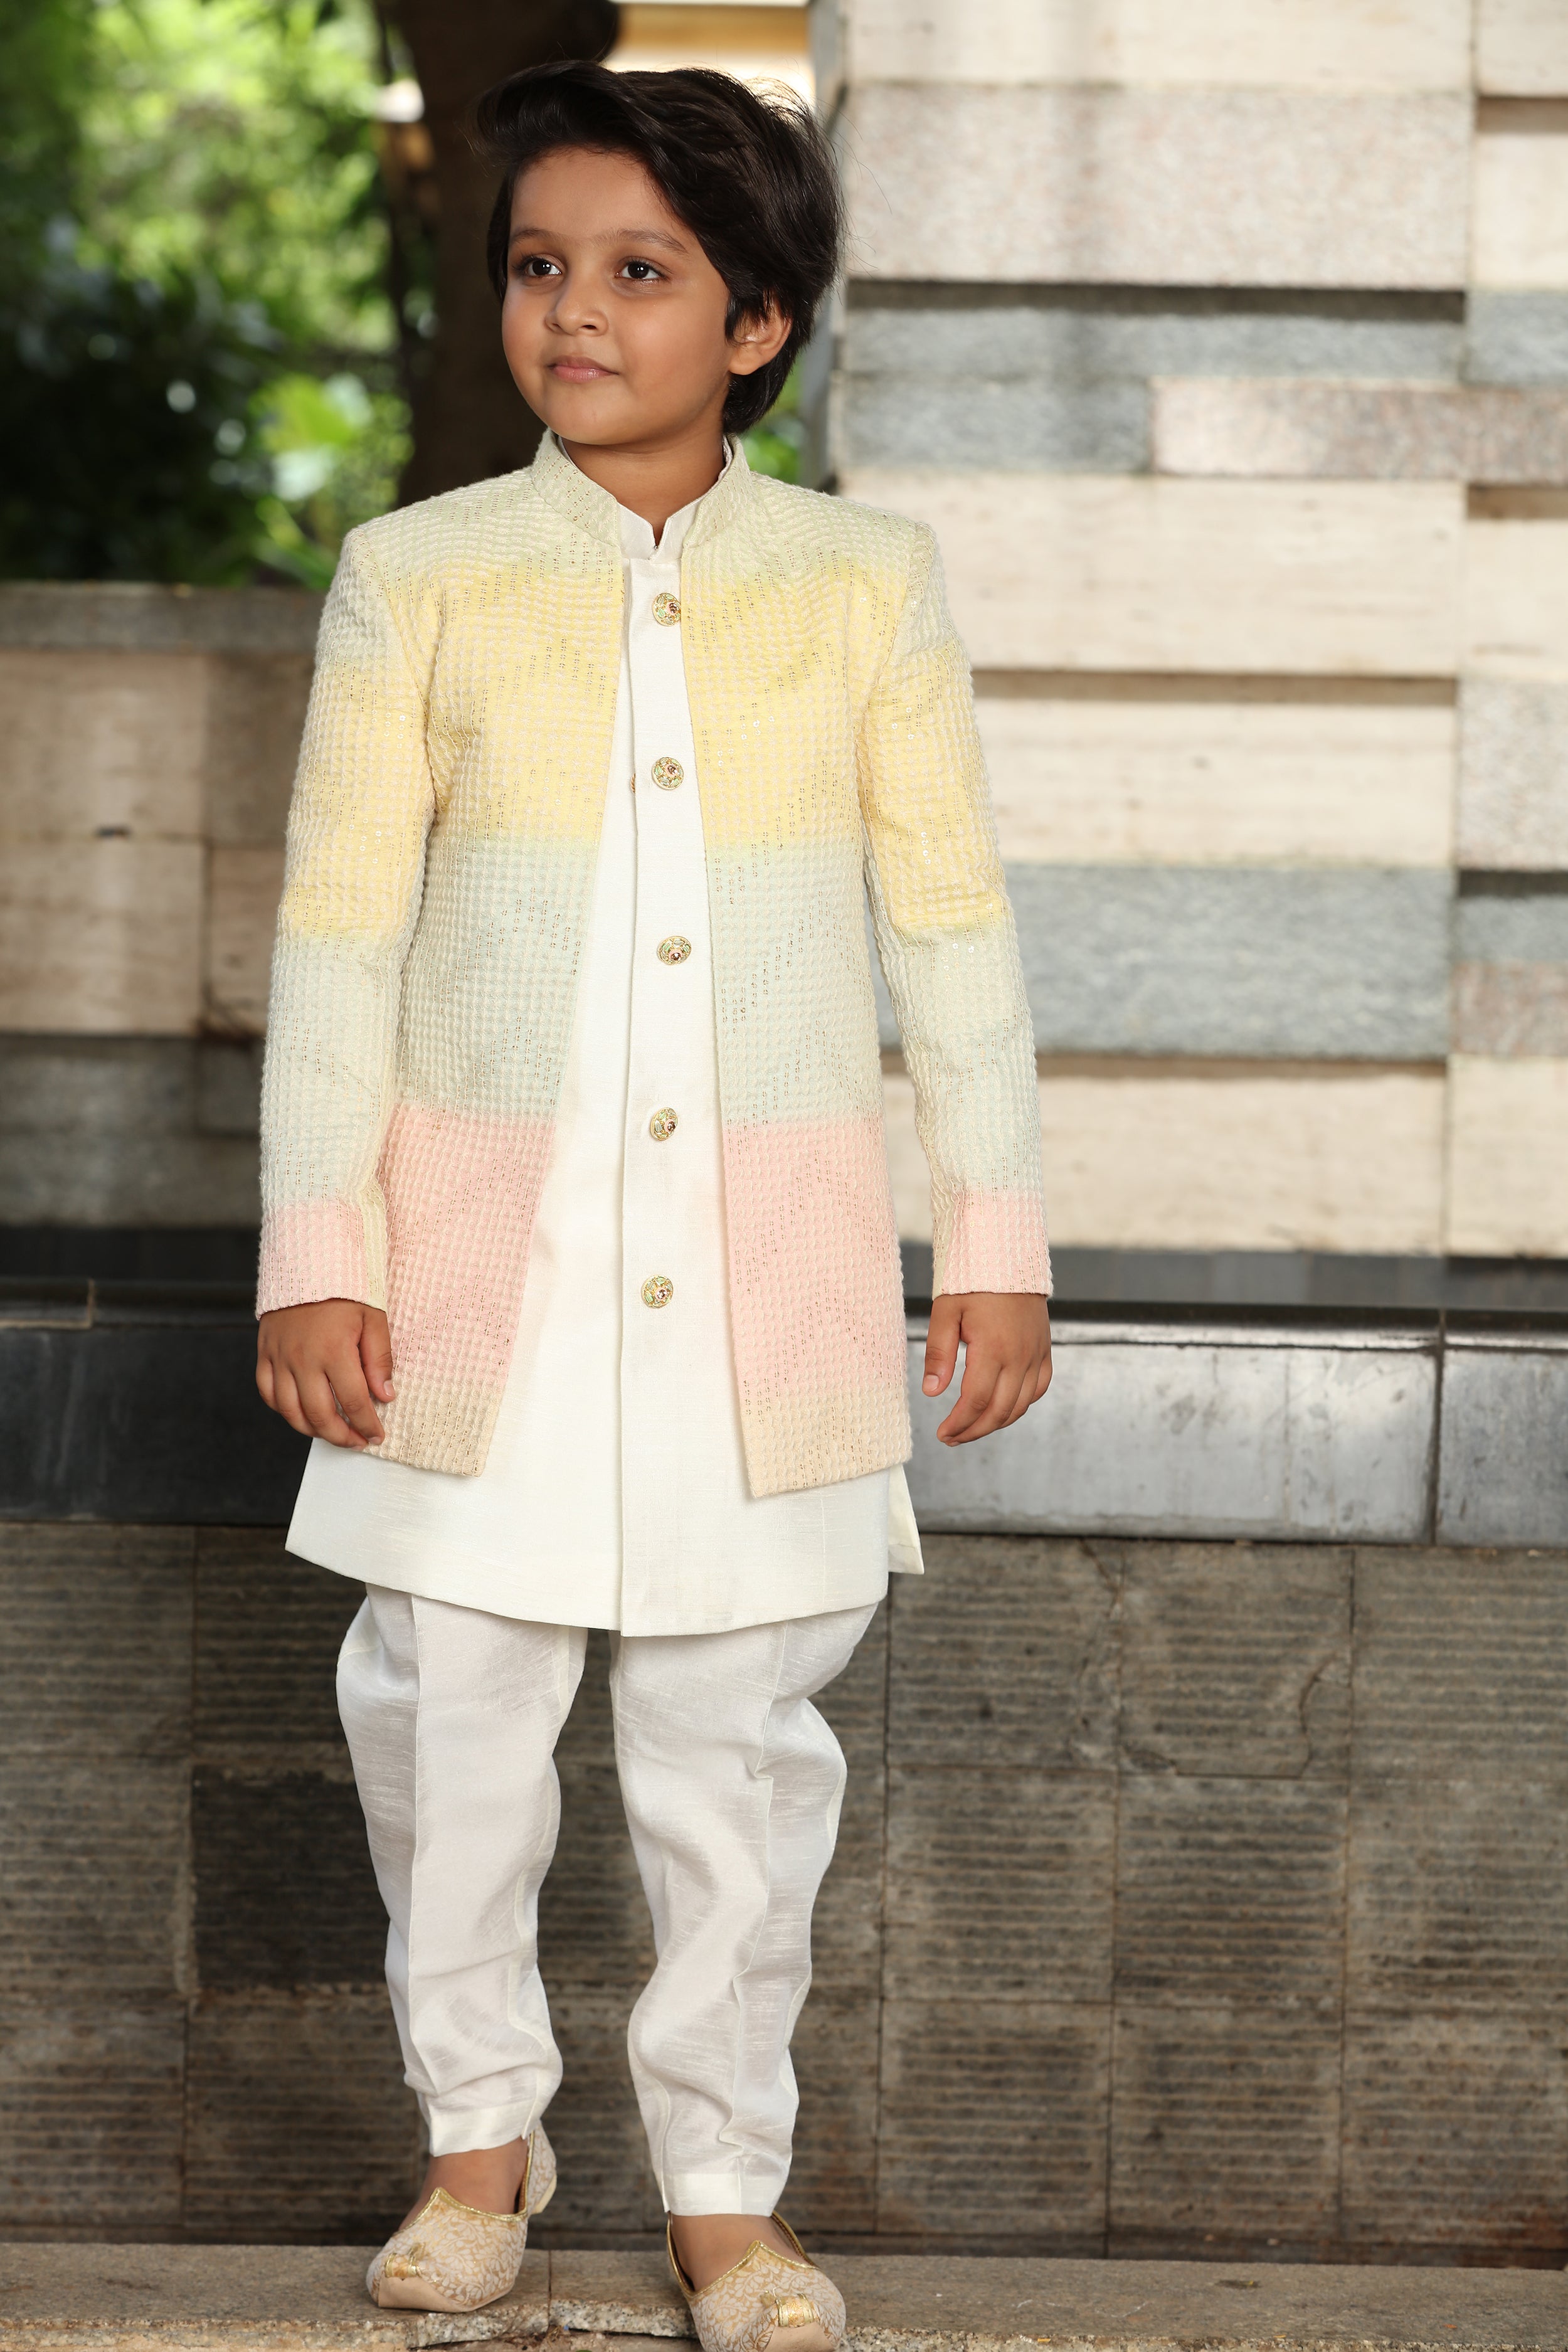 Gray boys suit for formal special events. Boys size 0-10.